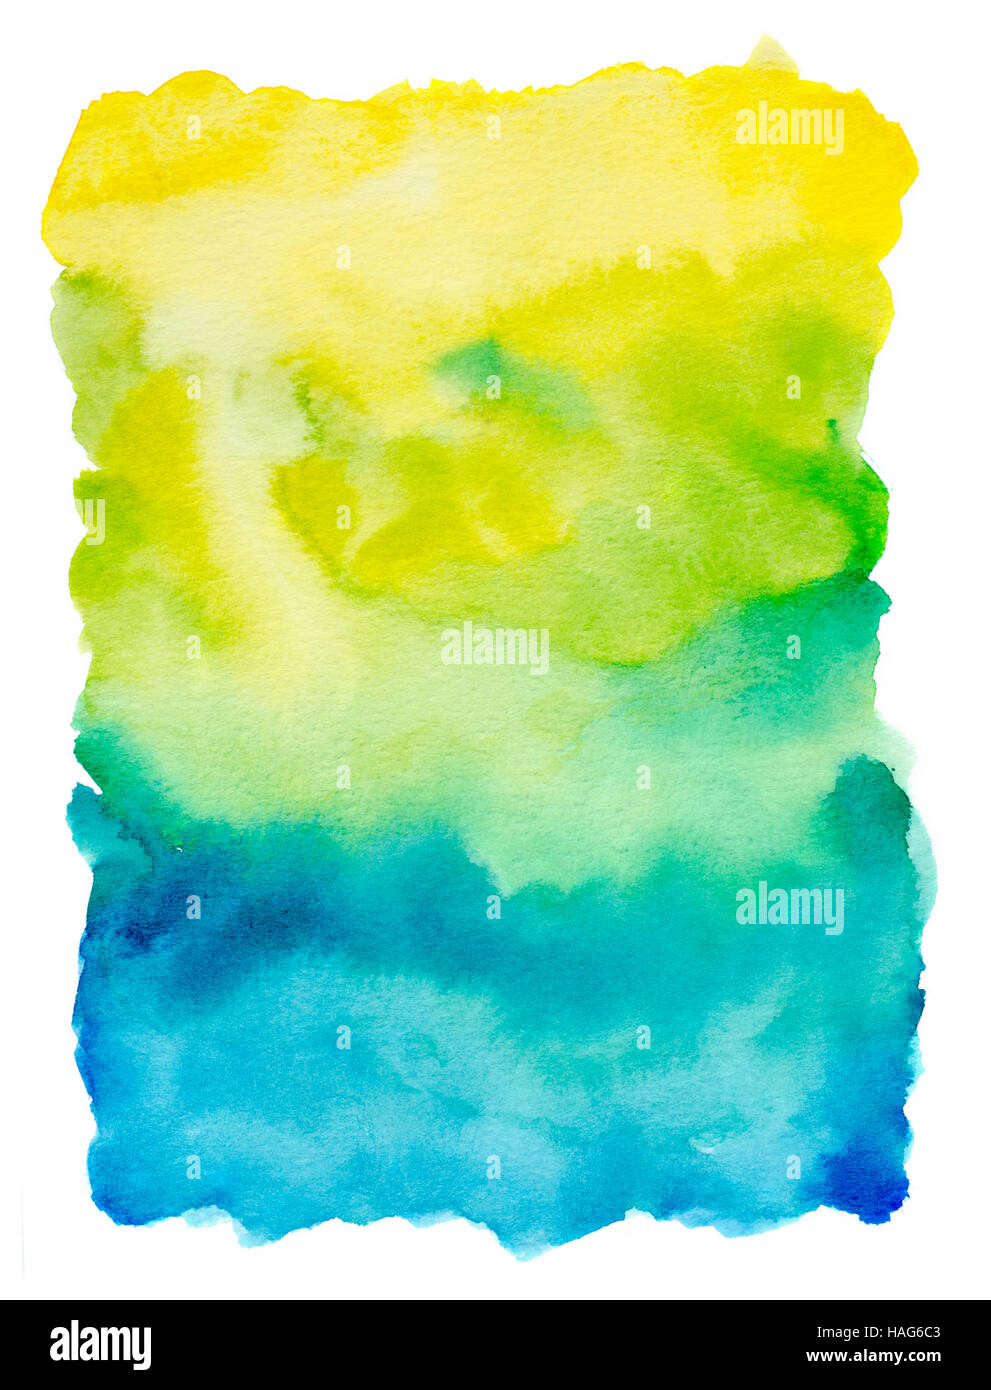 watercolor background hand painted on white with yellow, green and blue  tones Stock Photo - Alamy